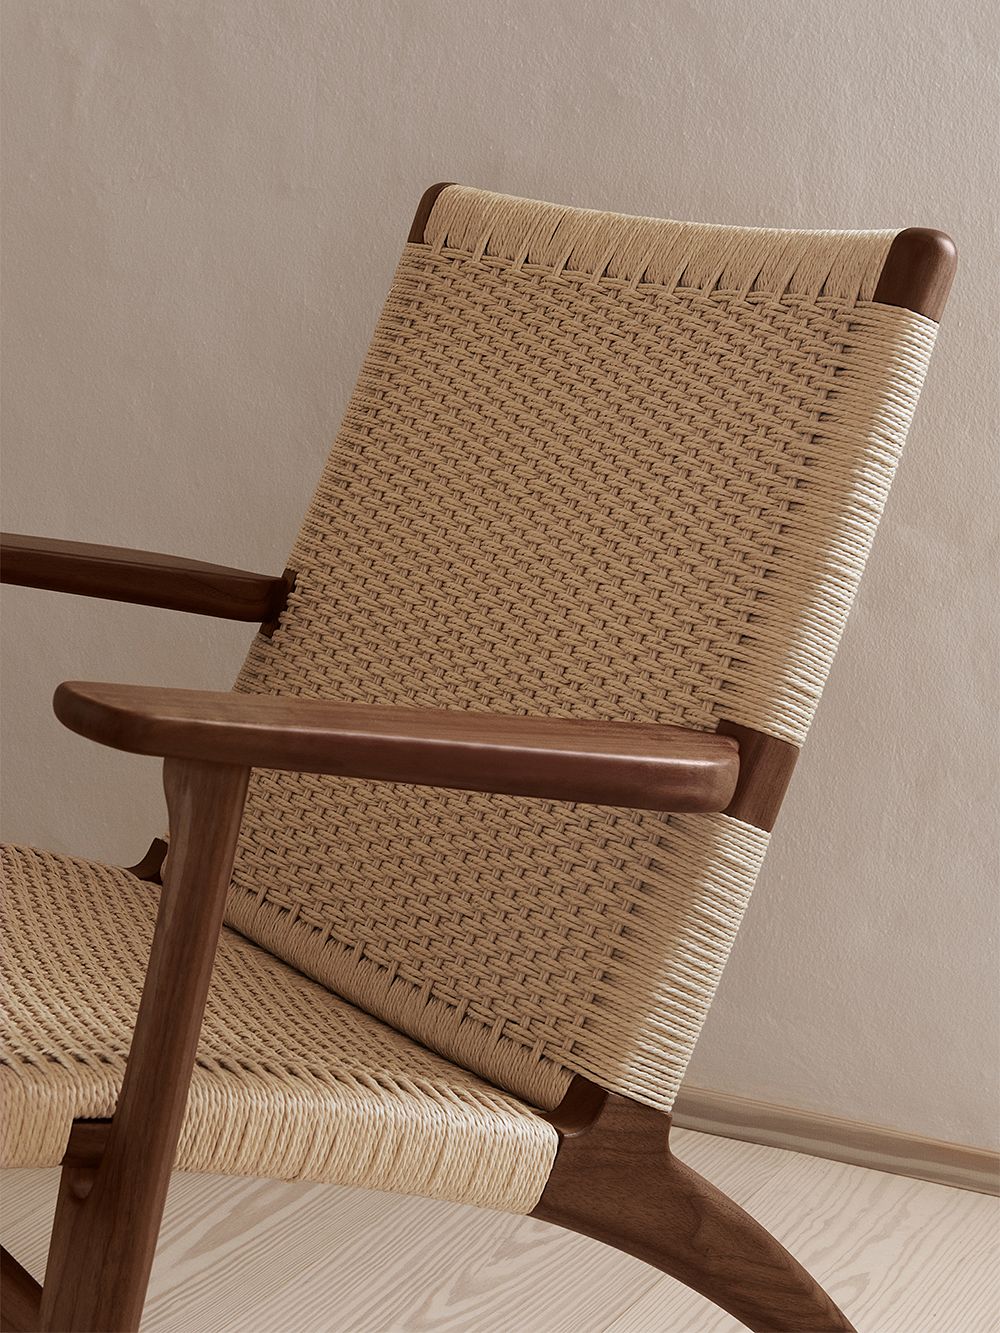 A close-up image showing the details of Carl Hansen & Søn's CH25 chair .